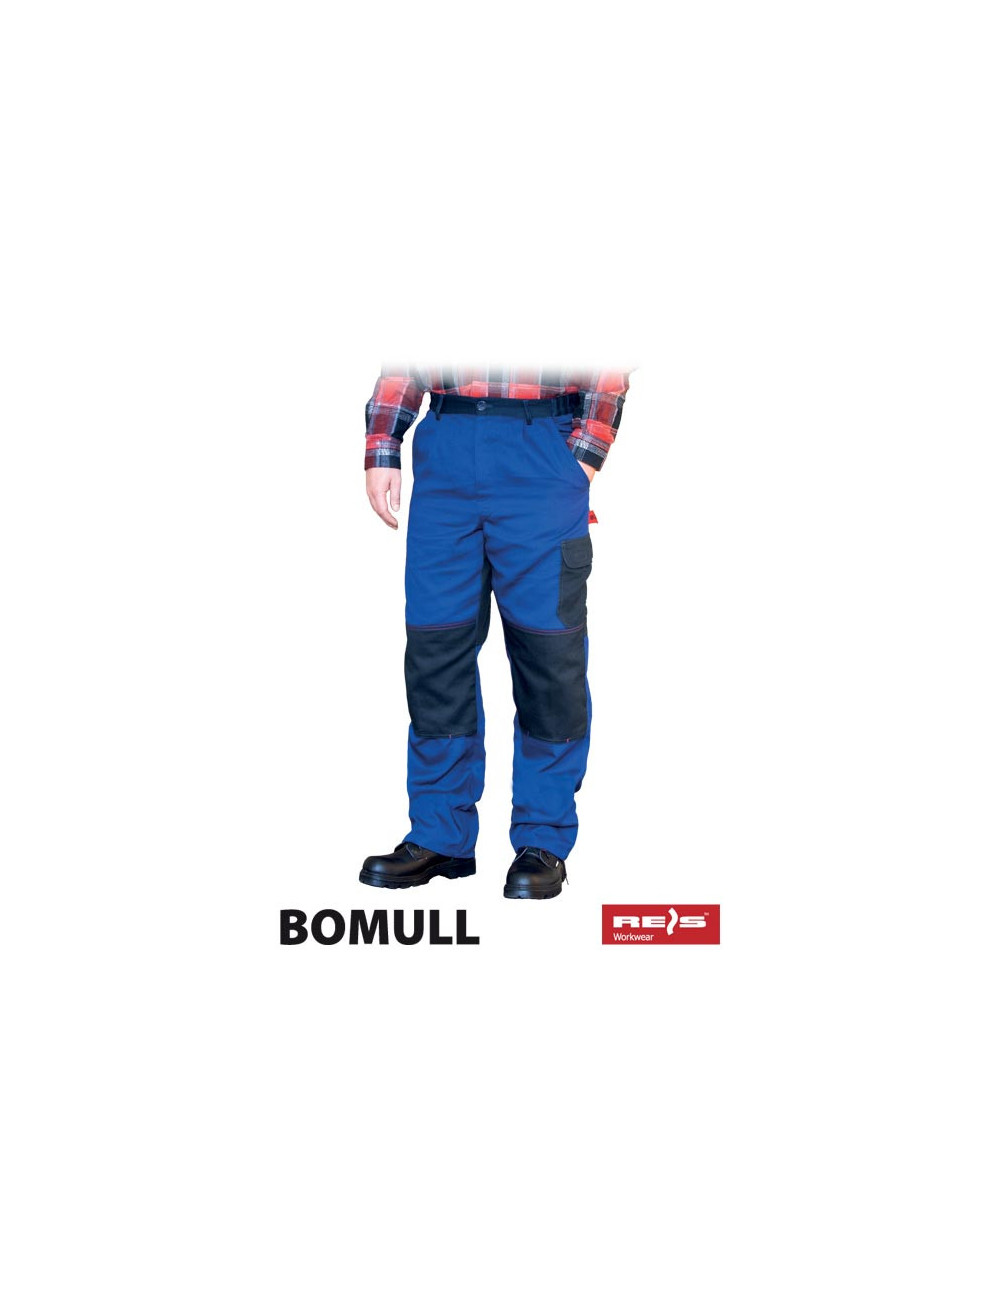 Protective waist trousers bomull-t ng blue-navy Reis